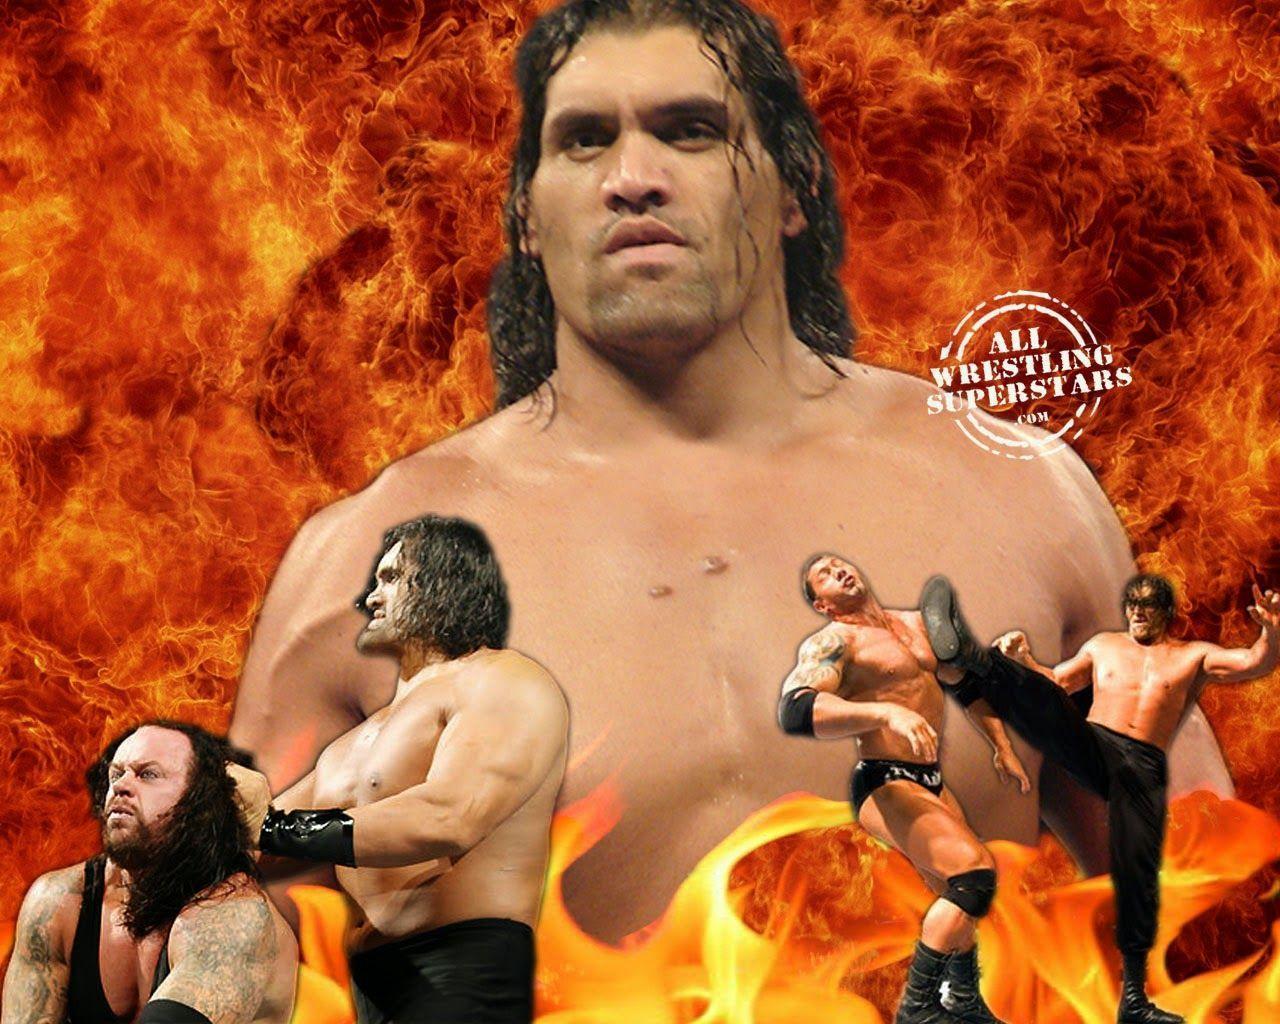 THE GREAT KHALI HD WALLPAPERS. FREE HD WALLPAPERS